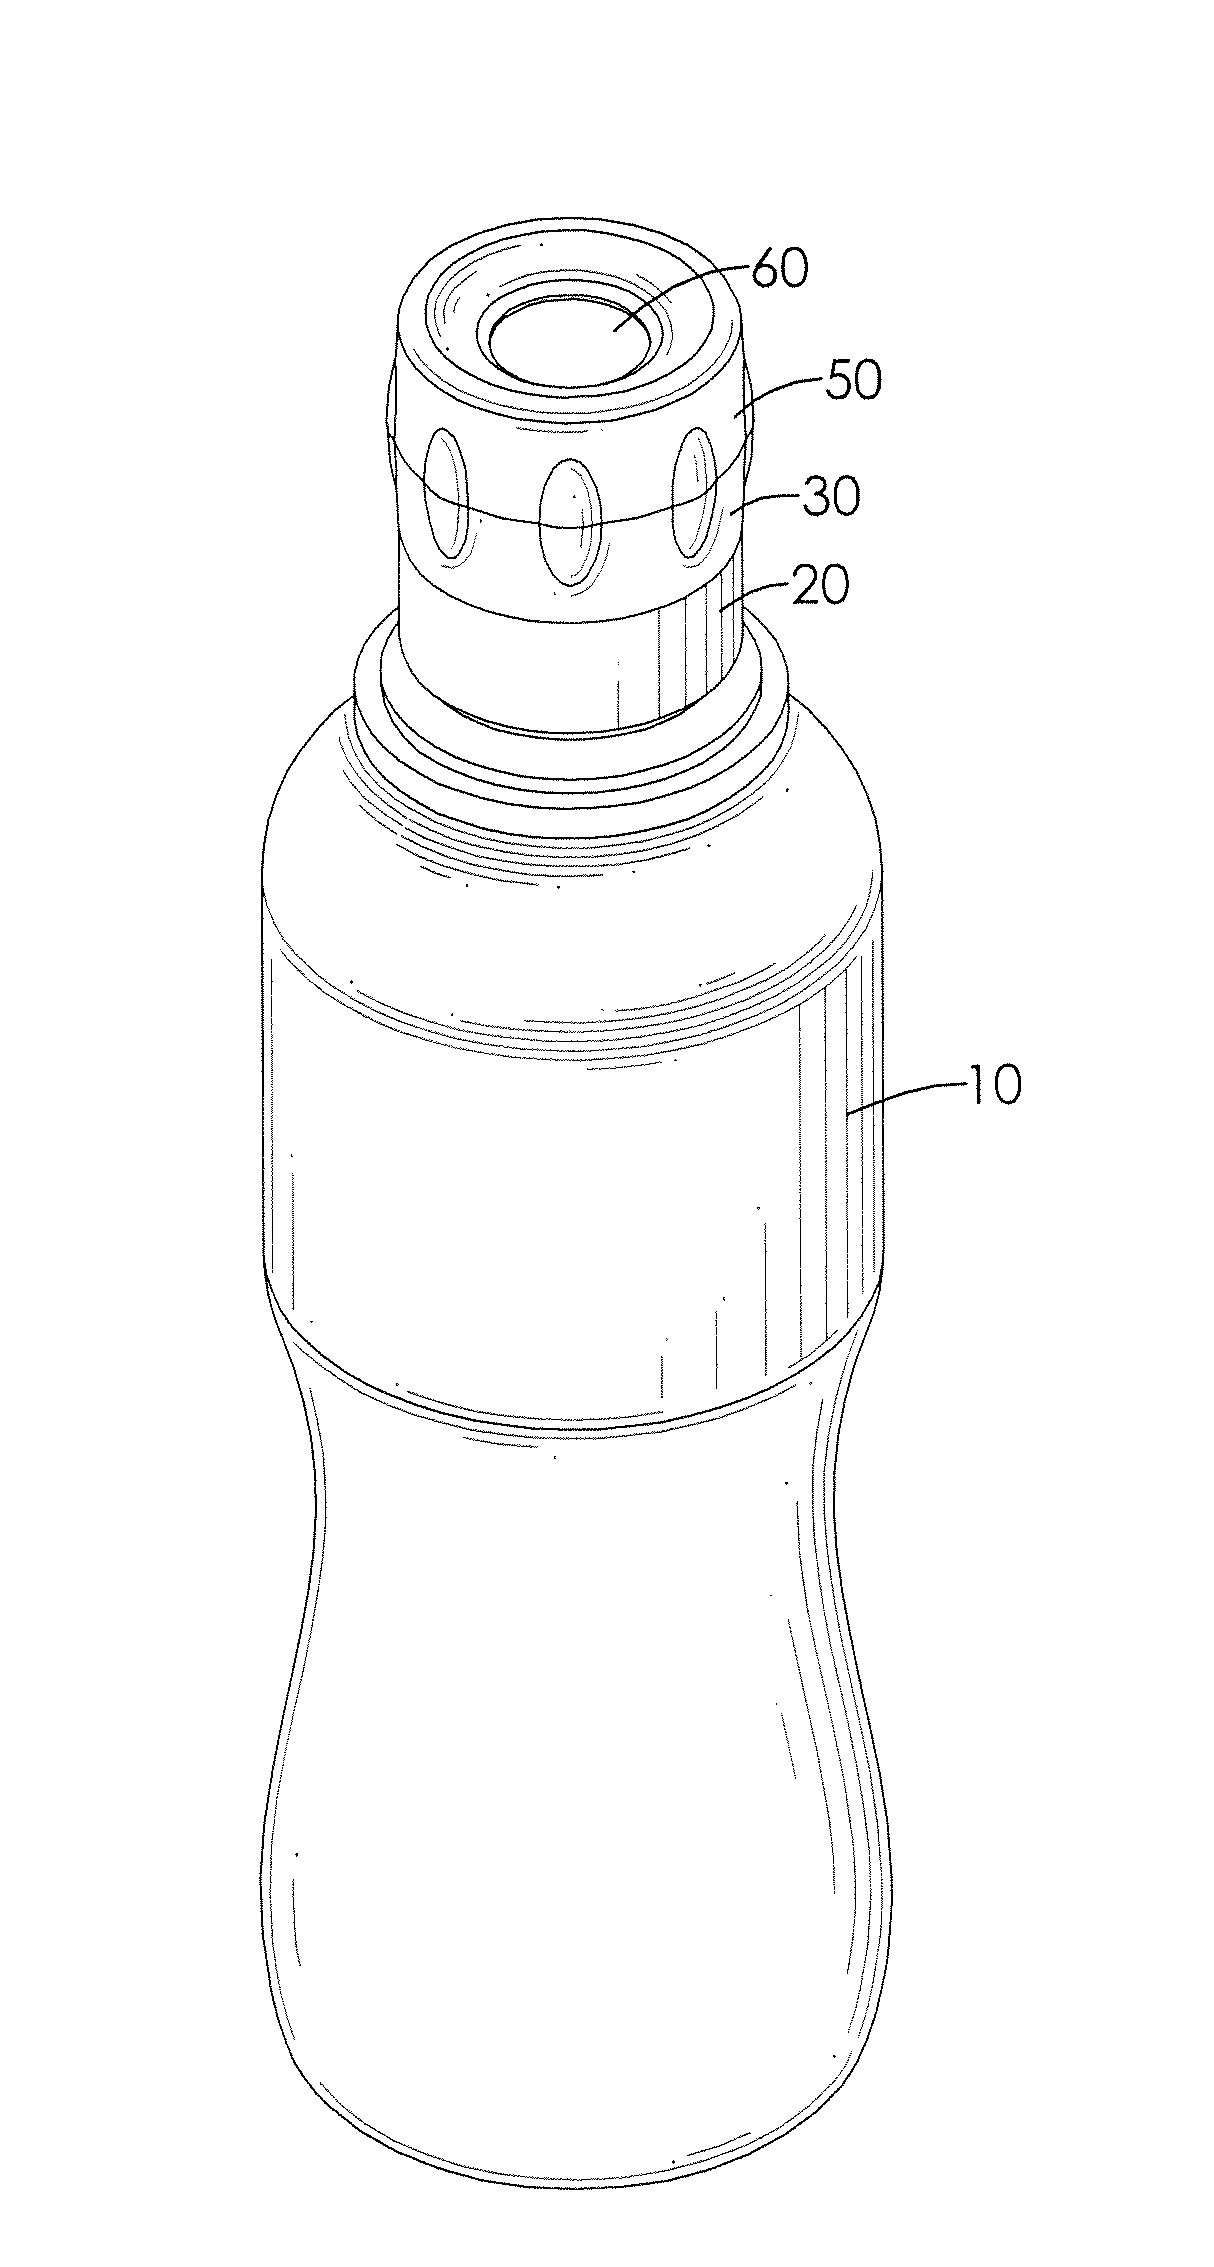 Lighting device having at least one water-activated battery mounted between a bottle cap and a bottle